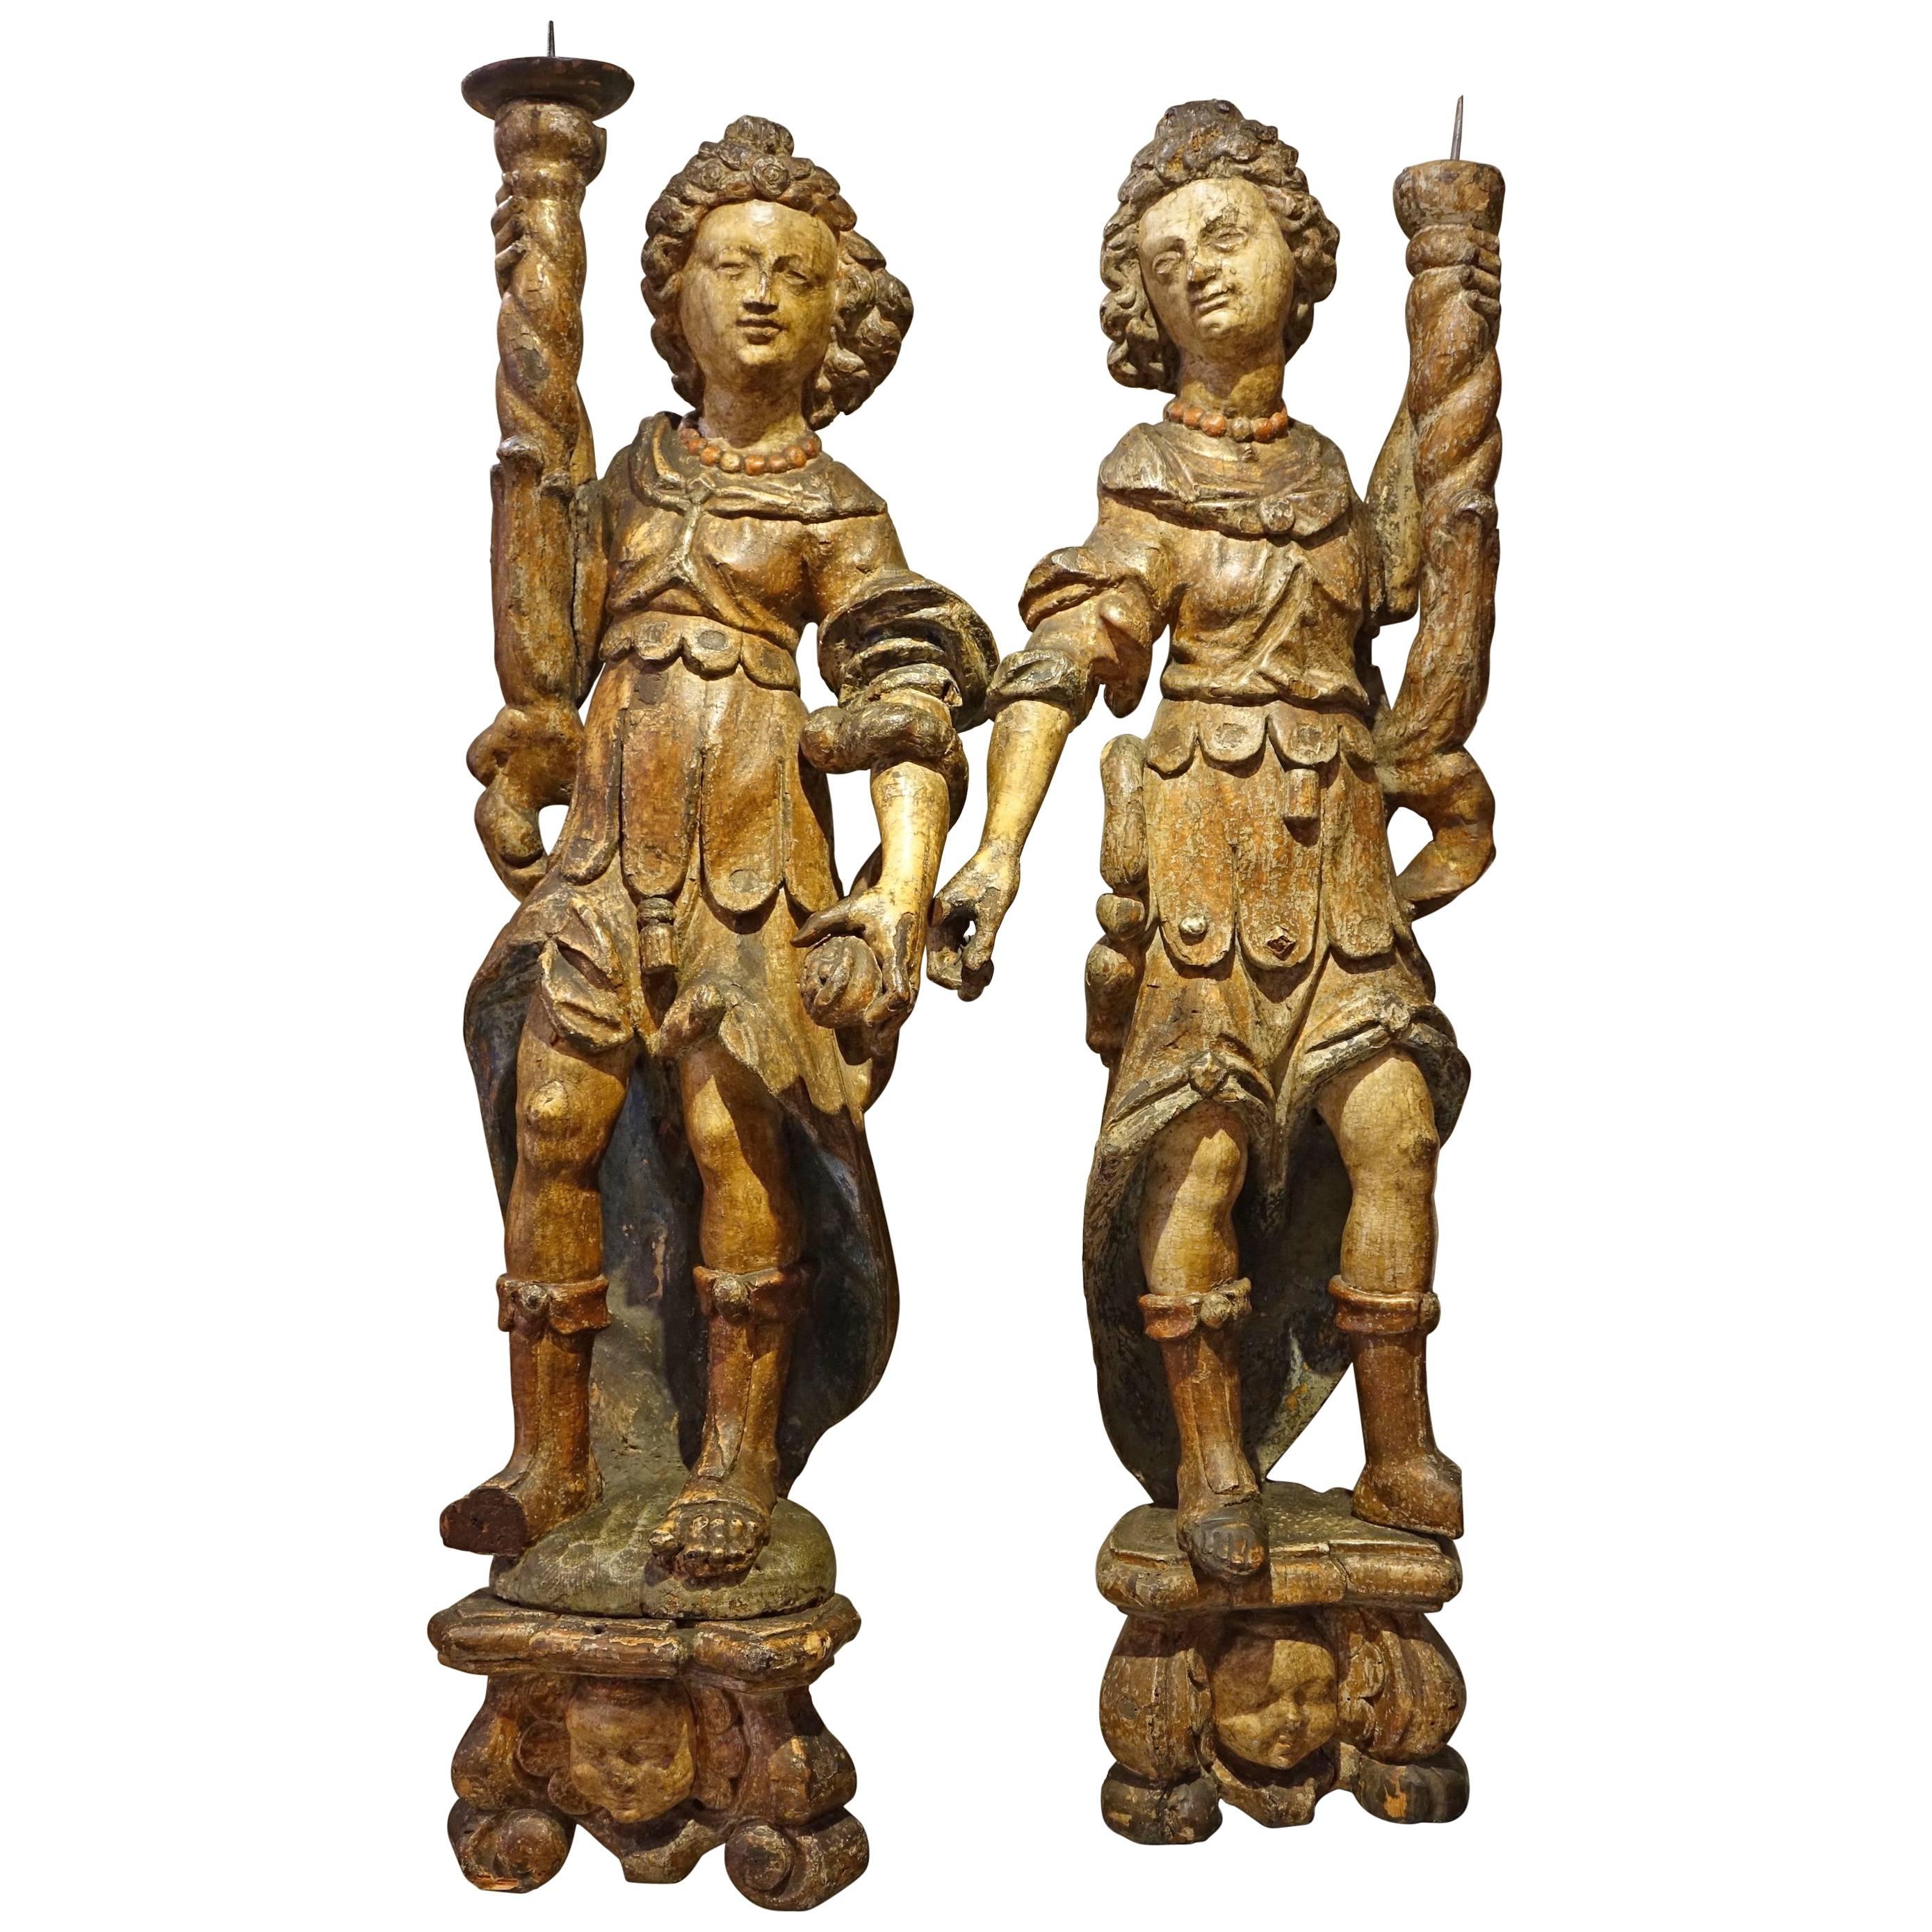 Pair of Angel Torchbearers, South of France or Spain, Late 16th Century